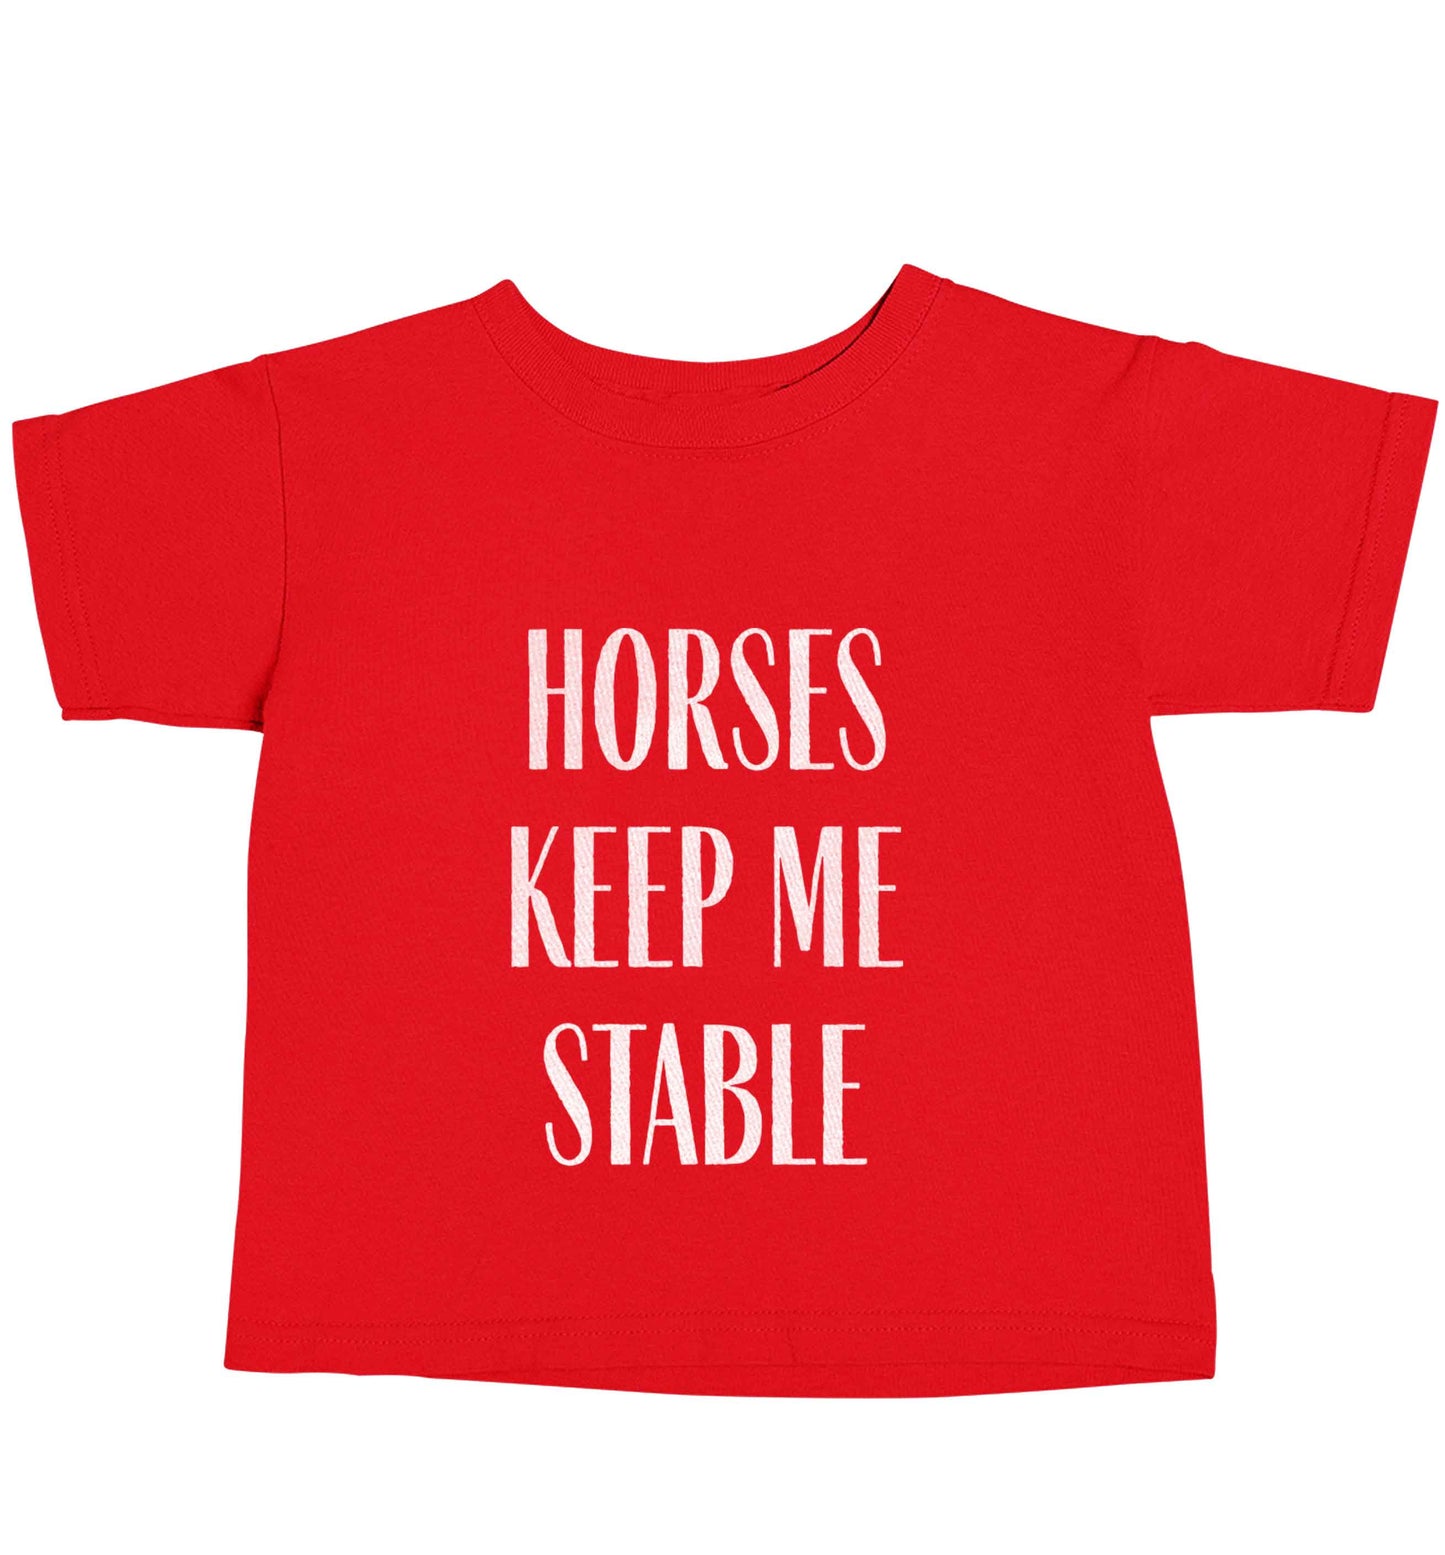 Horses keep me stable red baby toddler Tshirt 2 Years